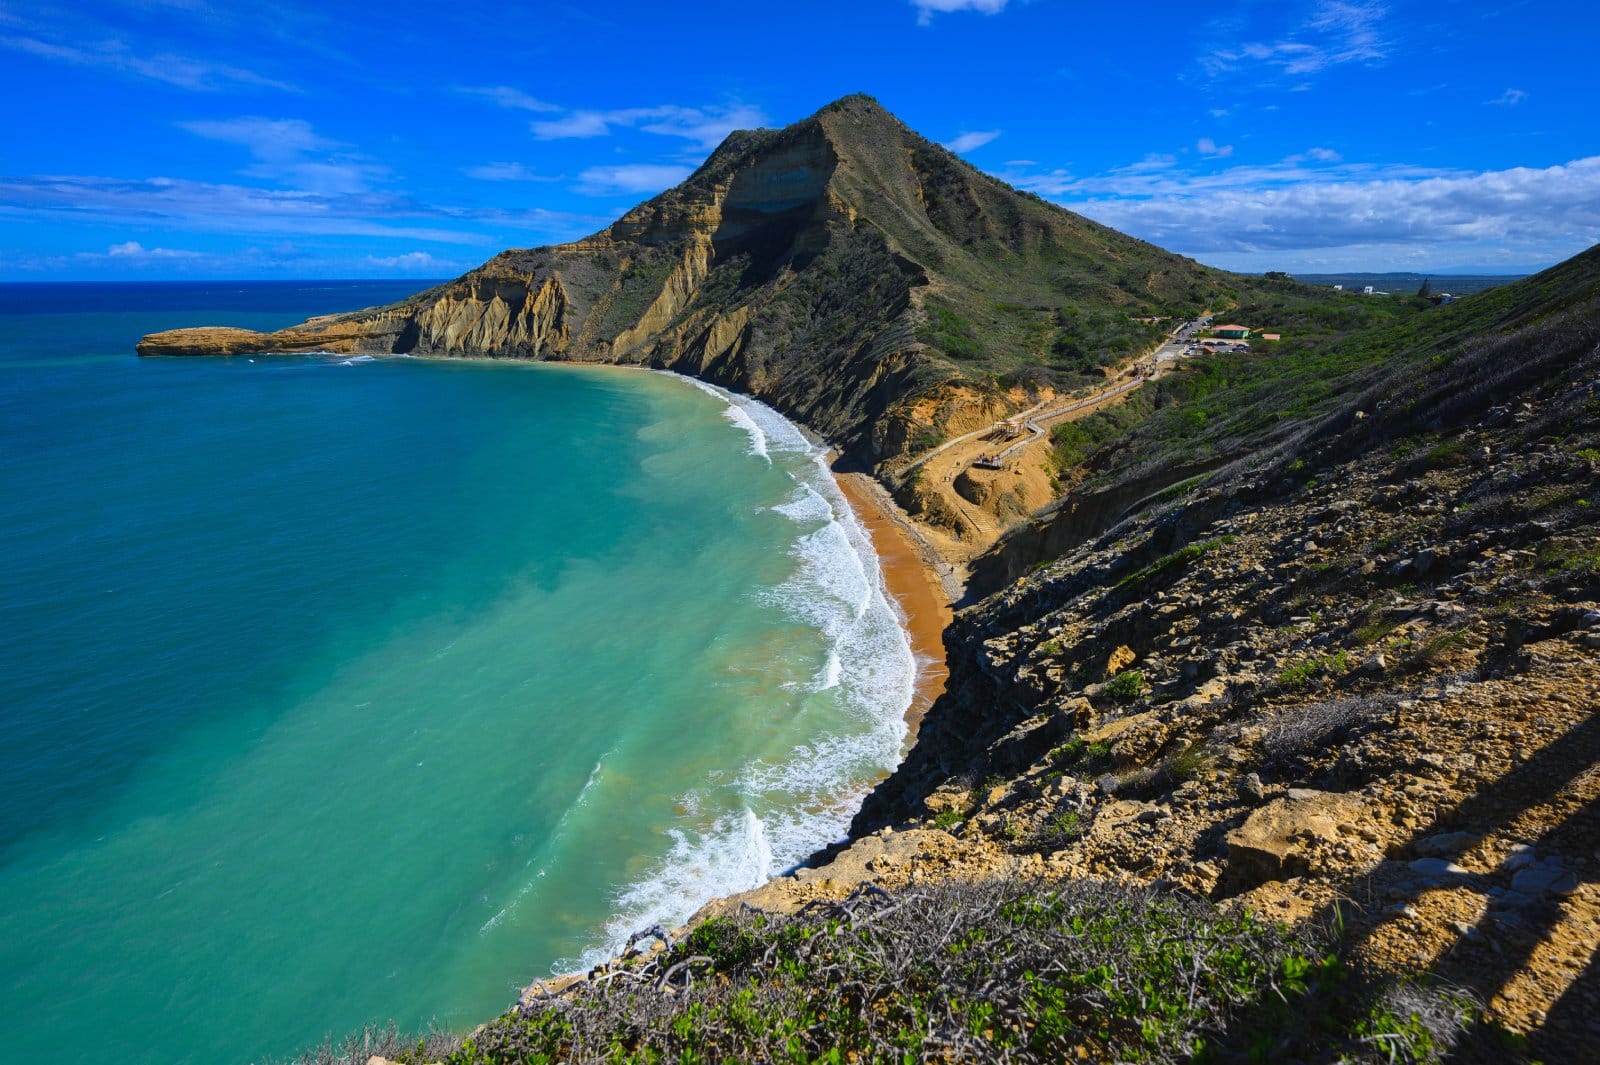 <p class="wp-caption-text">Image Credit: Shutterstock / Aleks Khan</p>  <p><span>Monte Cristi National Park, located northwest of the Dominican Republic, contrasts the country’s more frequented tropical landscapes. Dominated by the iconic El Morro, a sheer limestone cliff that rises dramatically from the sea, the park’s unique topography includes mangrove forests, subtropical dry forests, and saline lagoons. This diverse ecosystem is a haven for birdwatchers, with species such as the American flamingo and the Royal tern making their home here. The underwater landscapes are equally compelling, with coral reefs and sunken ships offering excellent opportunities for snorkeling and diving, providing a glimpse into the marine biodiversity and historical shipwrecks beneath the waves. Monte Cristi’s commitment to preserving its natural and historical assets while promoting eco-friendly tourism allows visitors to explore this unique area responsibly. The park’s relatively remote location ensures that its beaches and natural features remain unspoiled, offering a serene and intimate experience of the Dominican Republic’s natural beauty.</span></p>